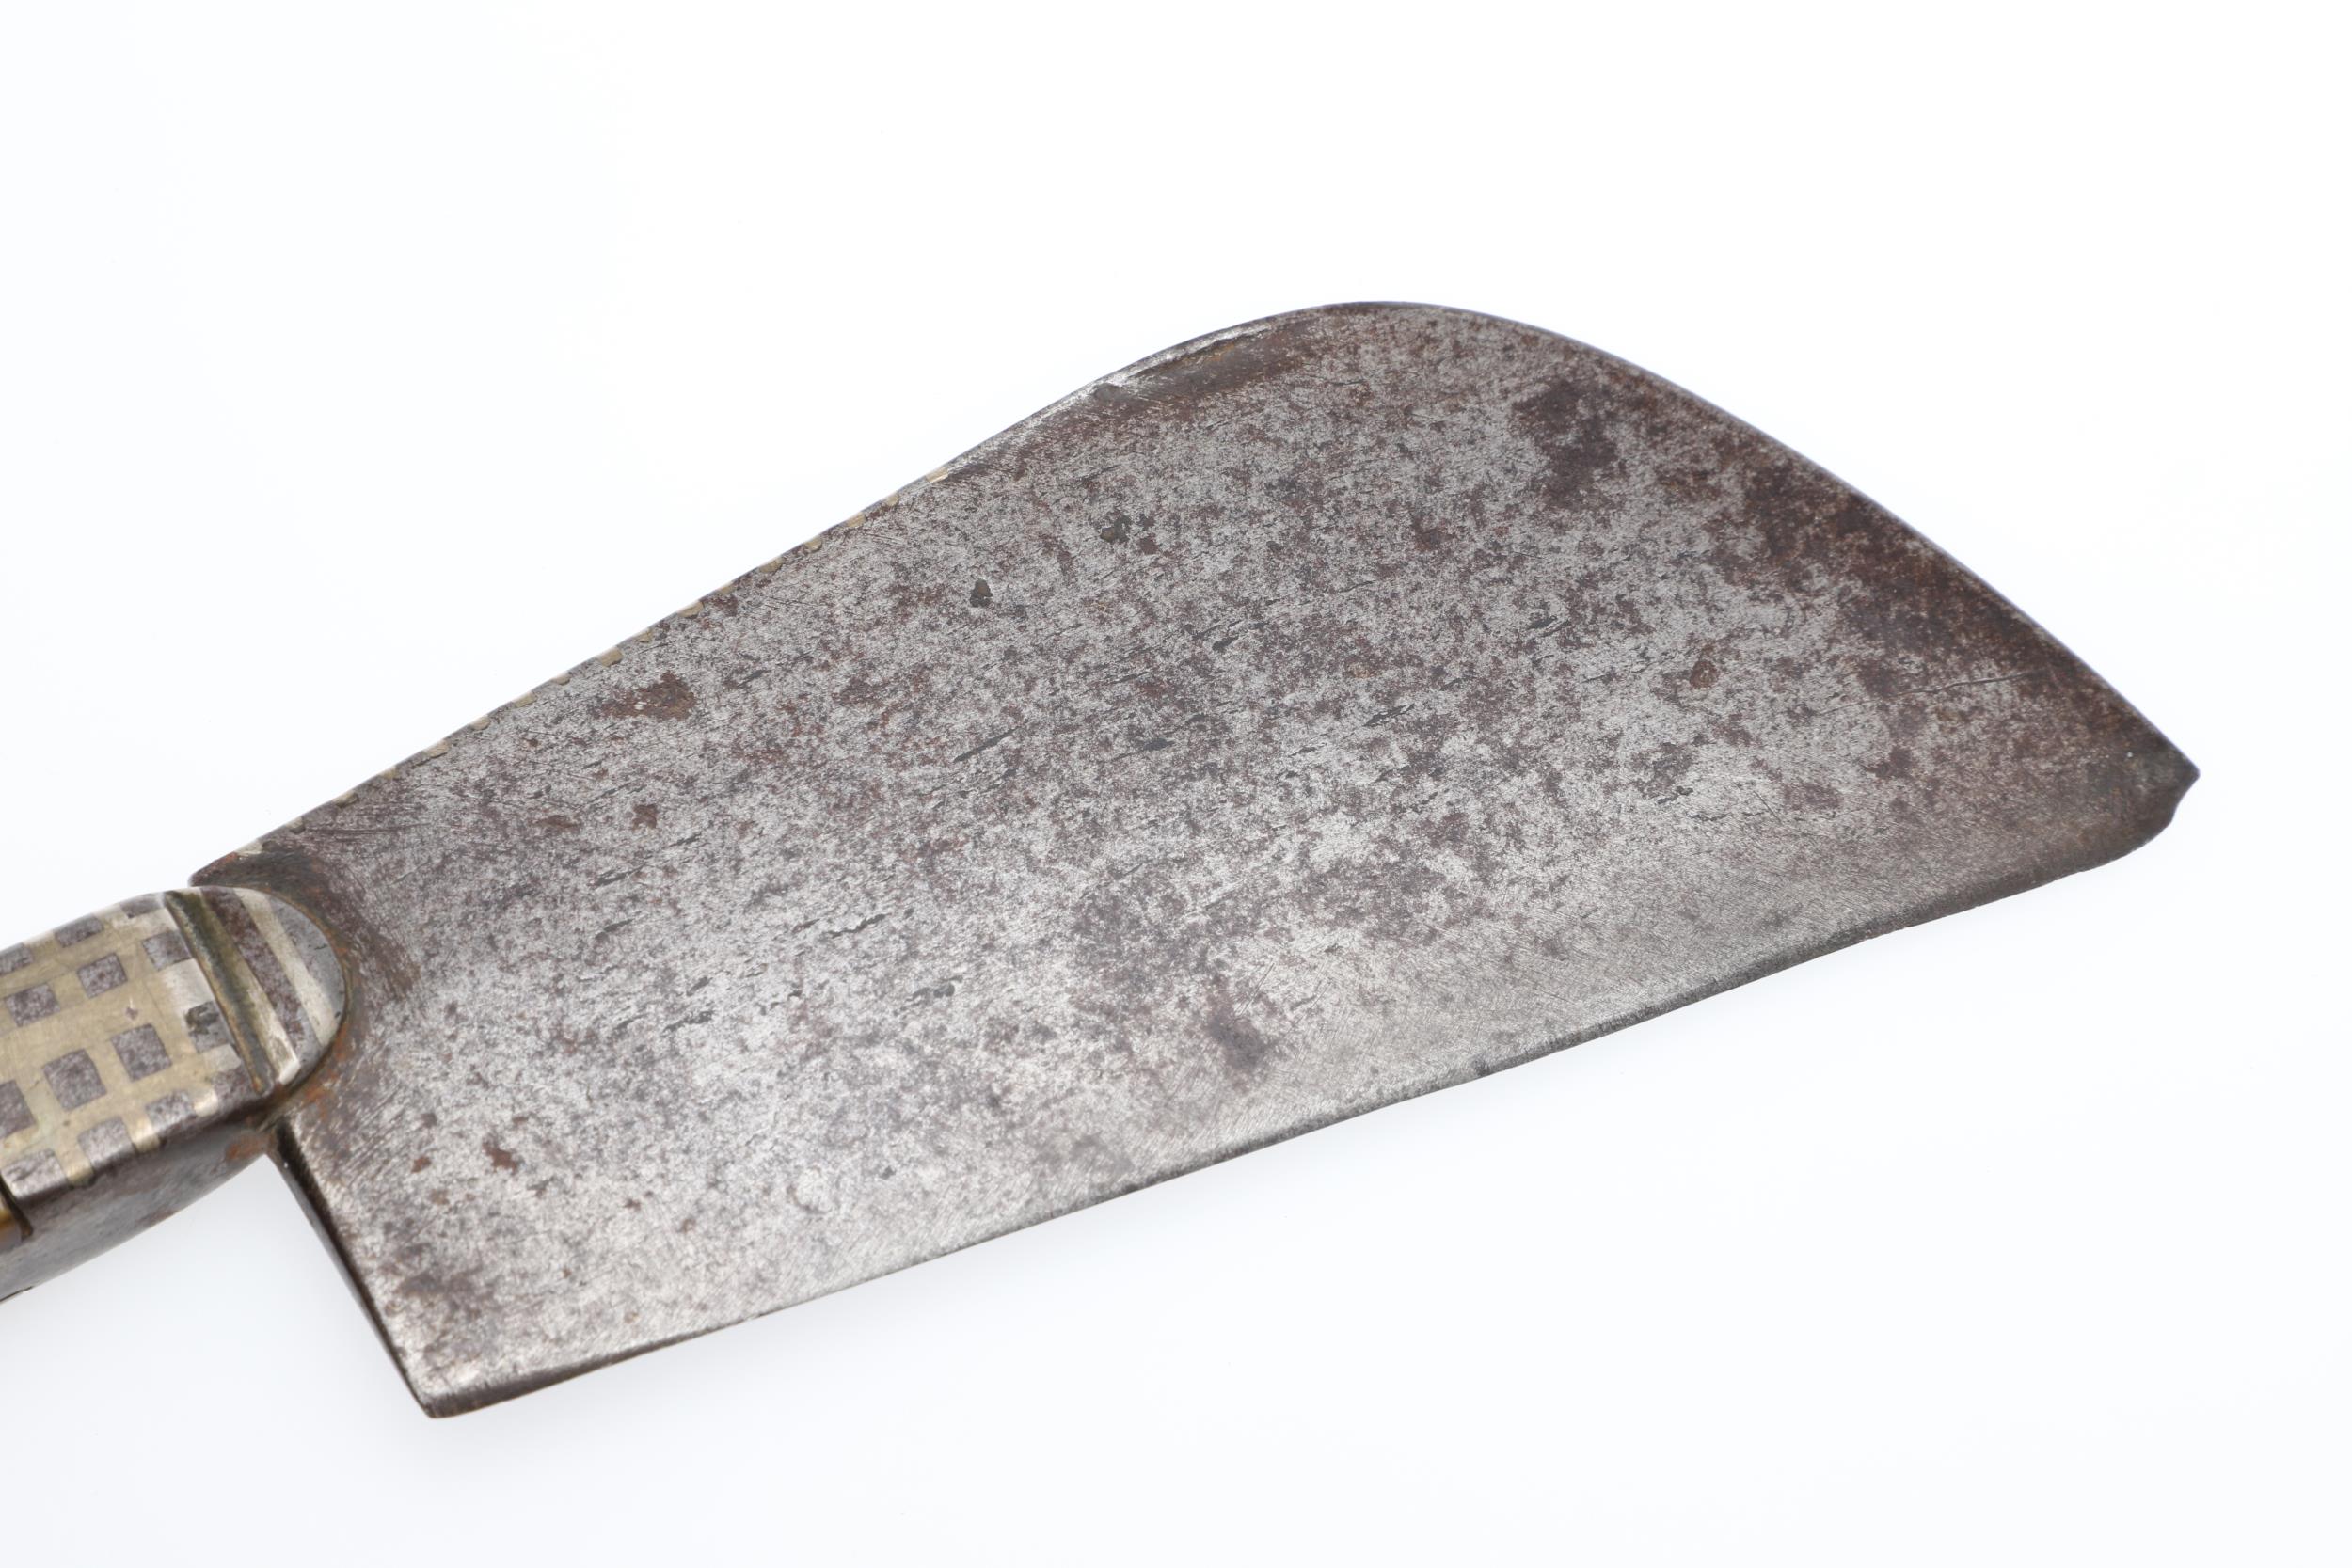 AN UNUSUAL 19TH CENTURY INDIAN HAND AXE OR KNIFE. - Image 2 of 8